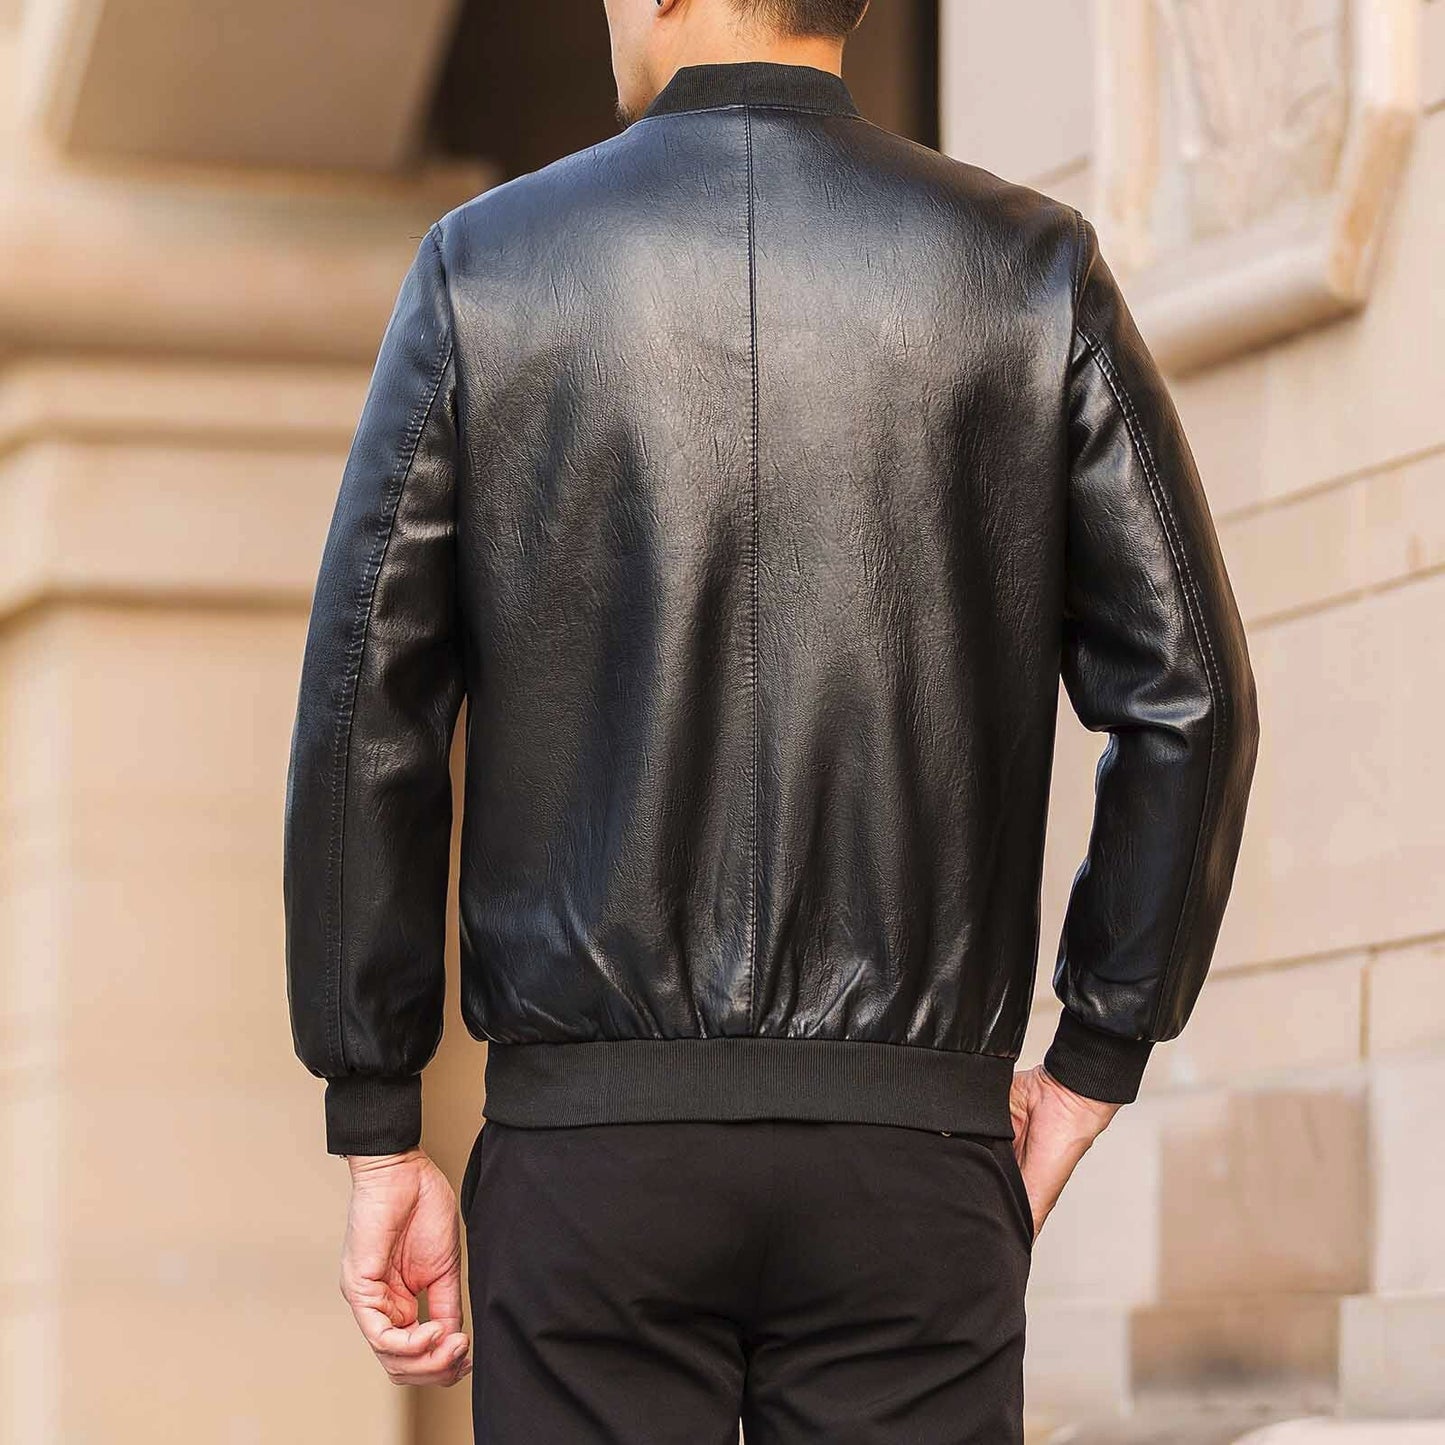 Thick Men's Leather Jacket